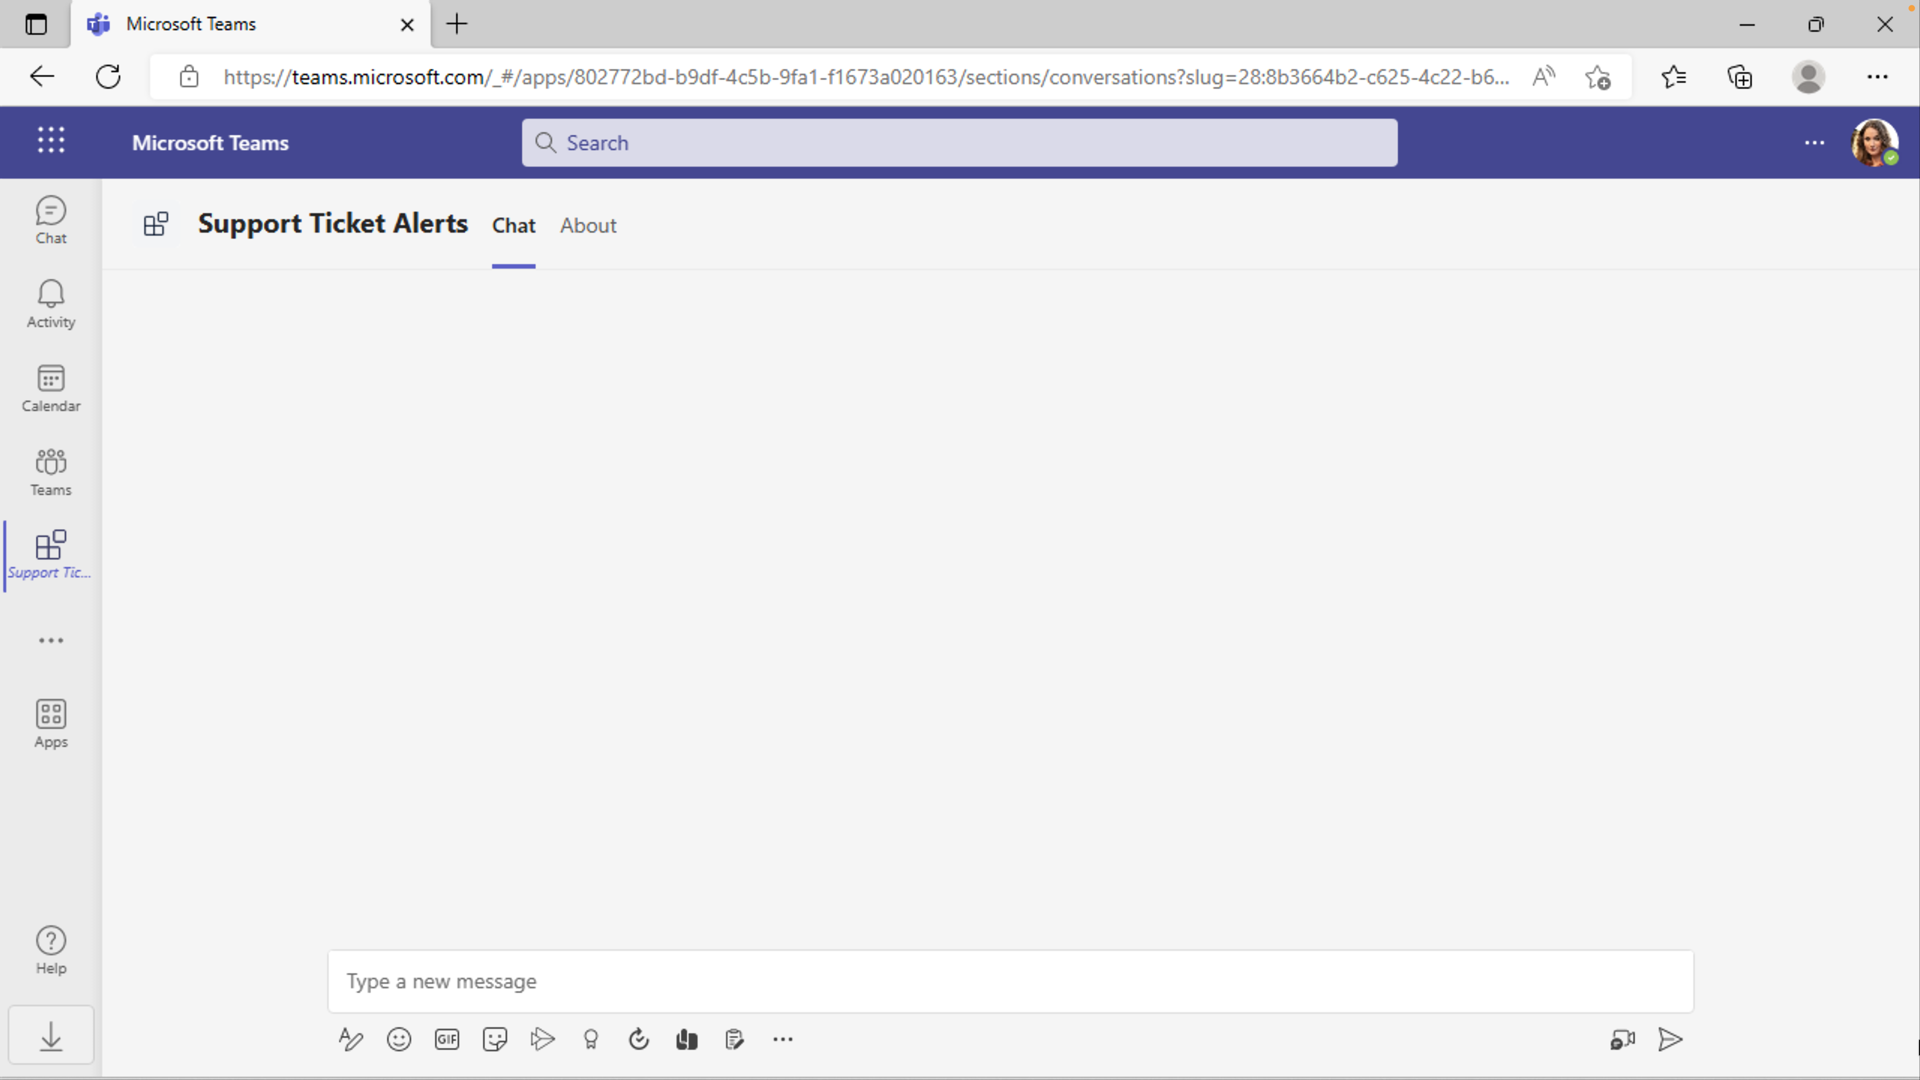 Screenshot of the Teams web client that shows an empty bot chat window for support ticket alerts.